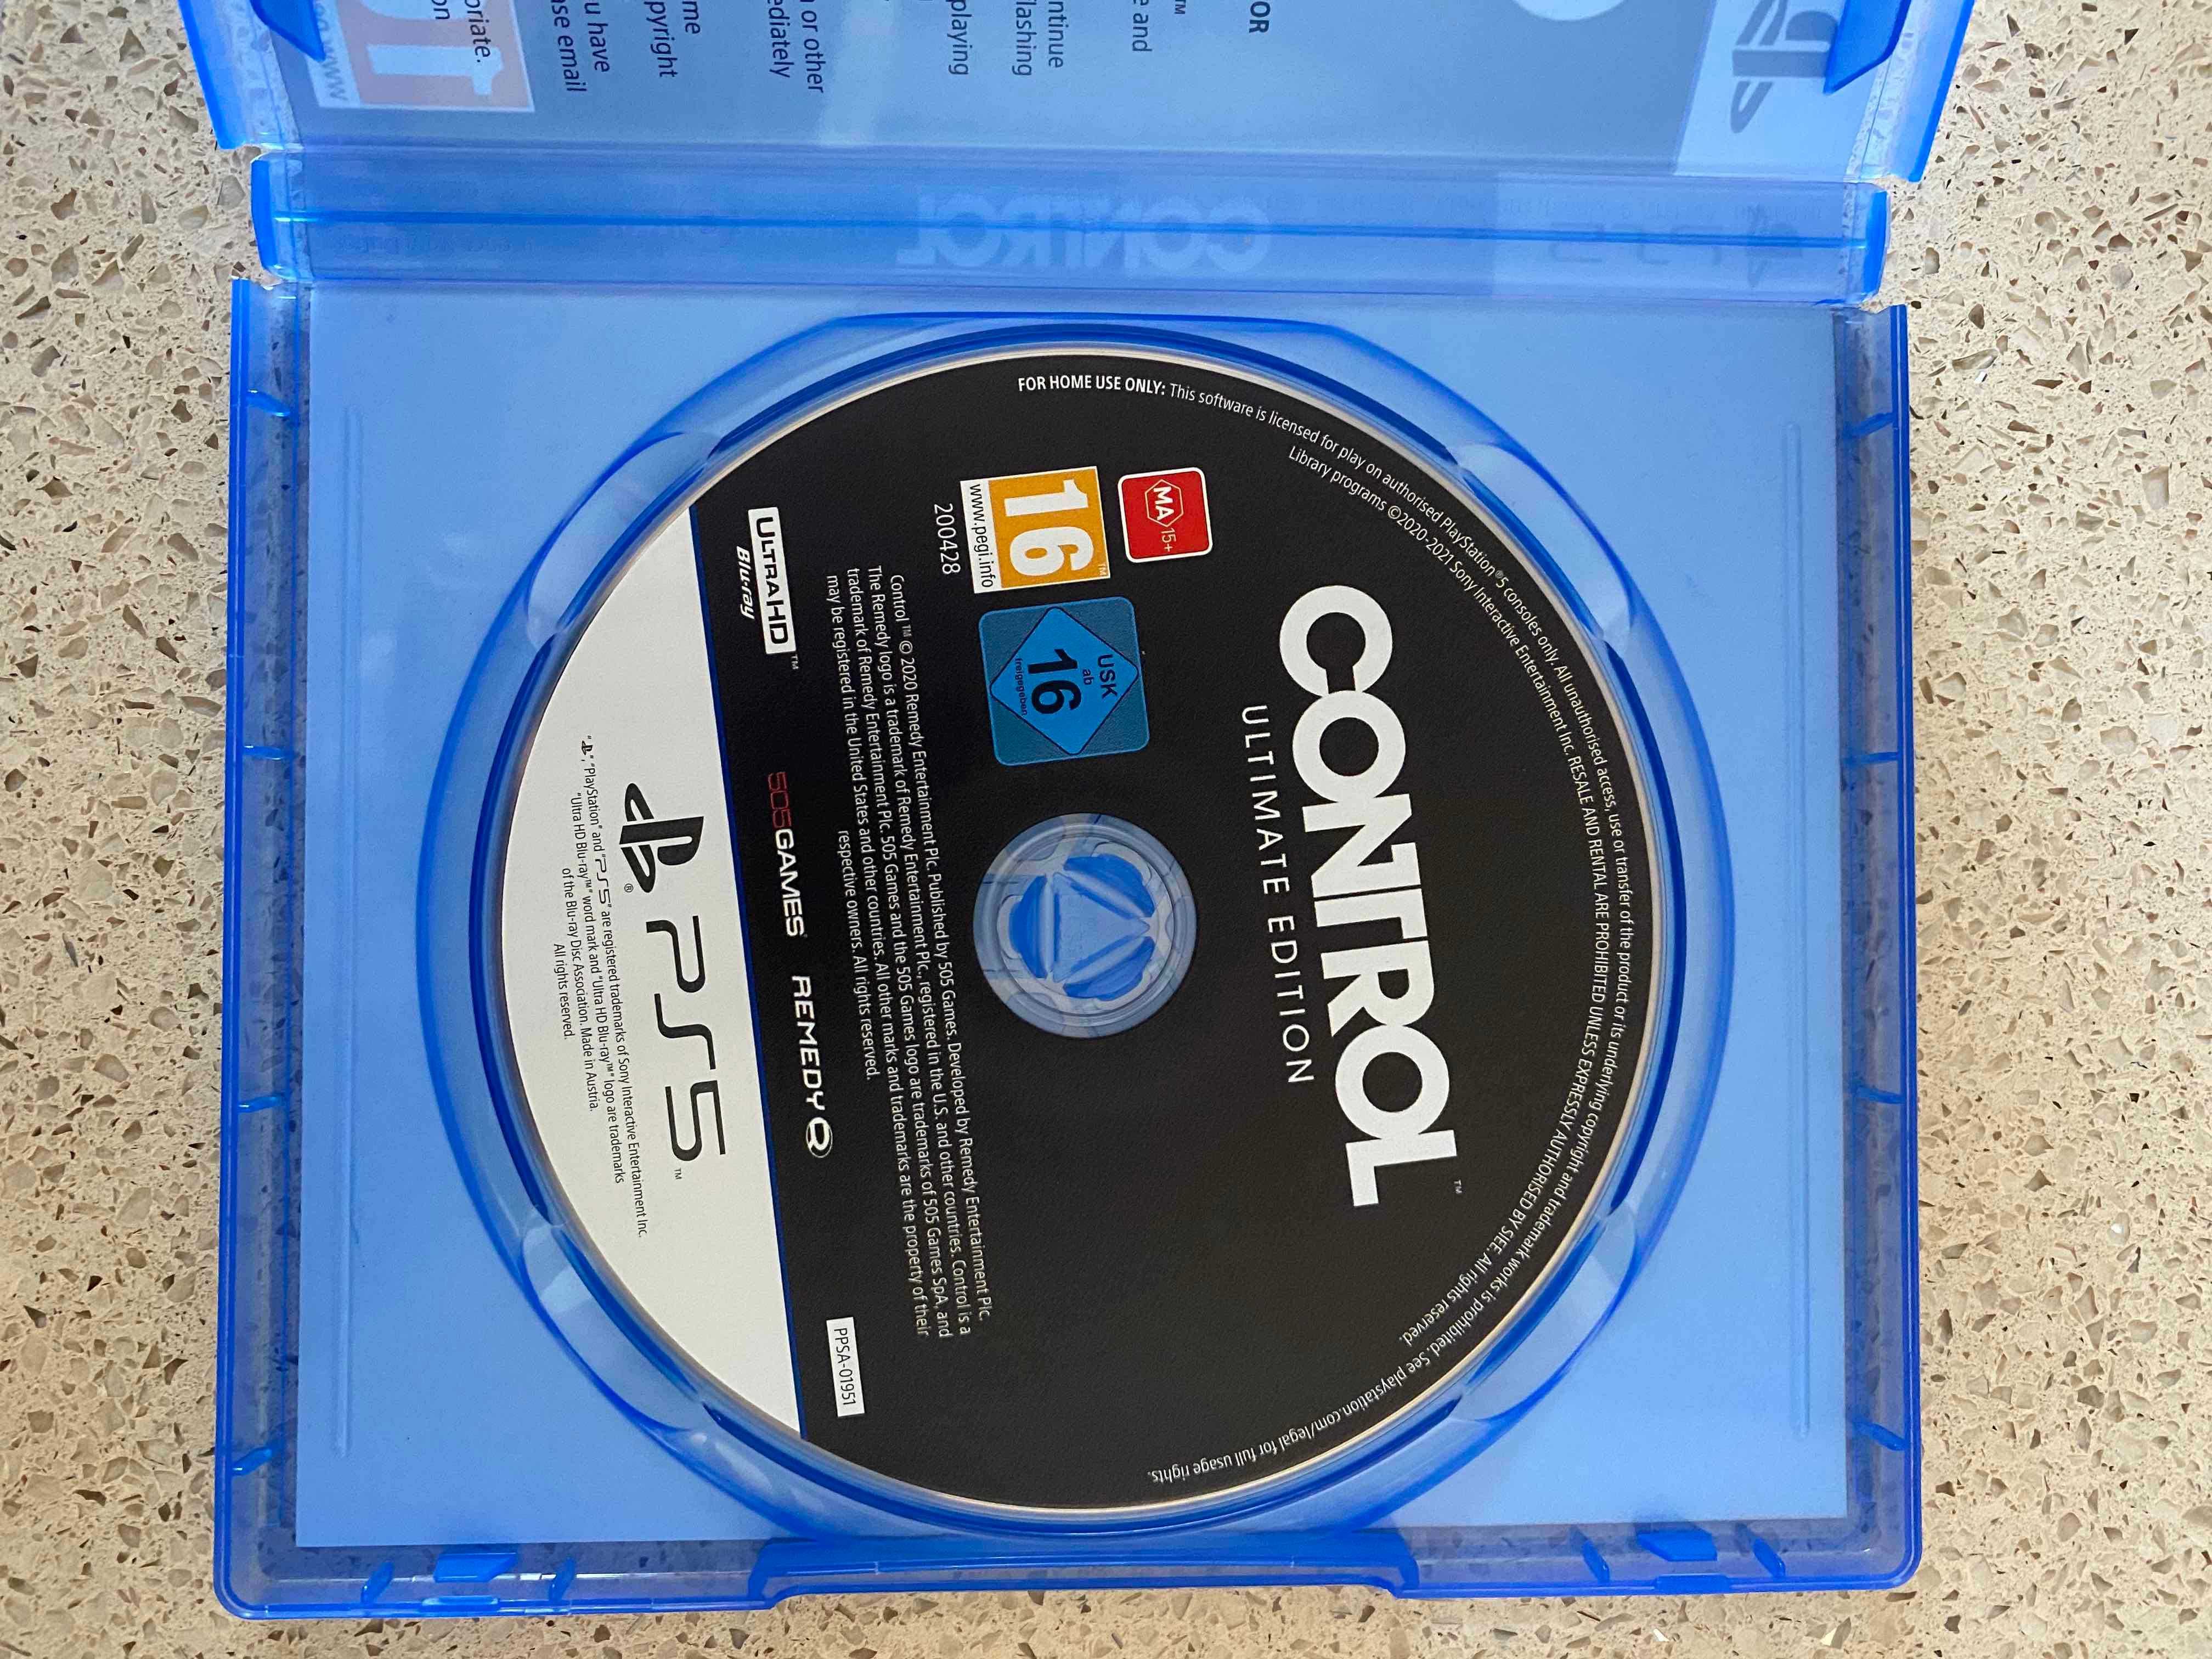 Control Ultimate Edition PS5